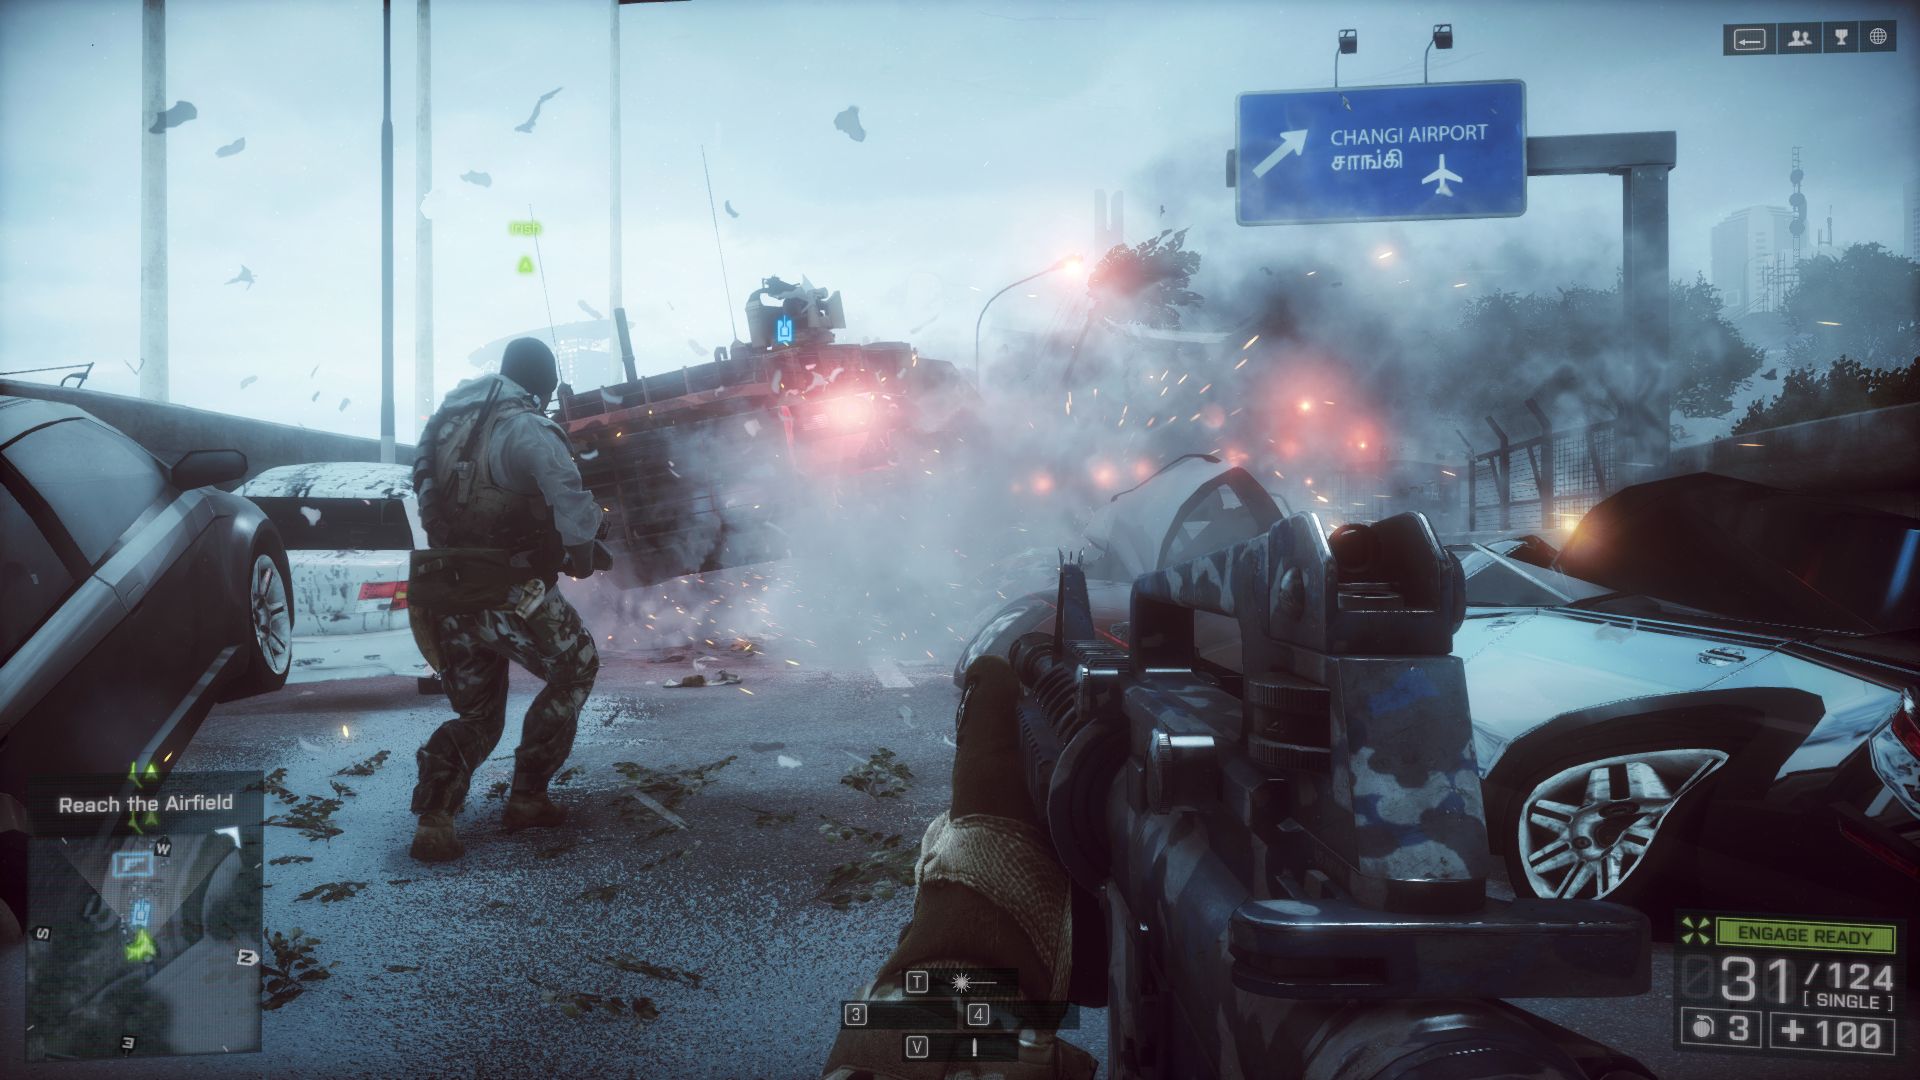 battlefield 4 system requirements